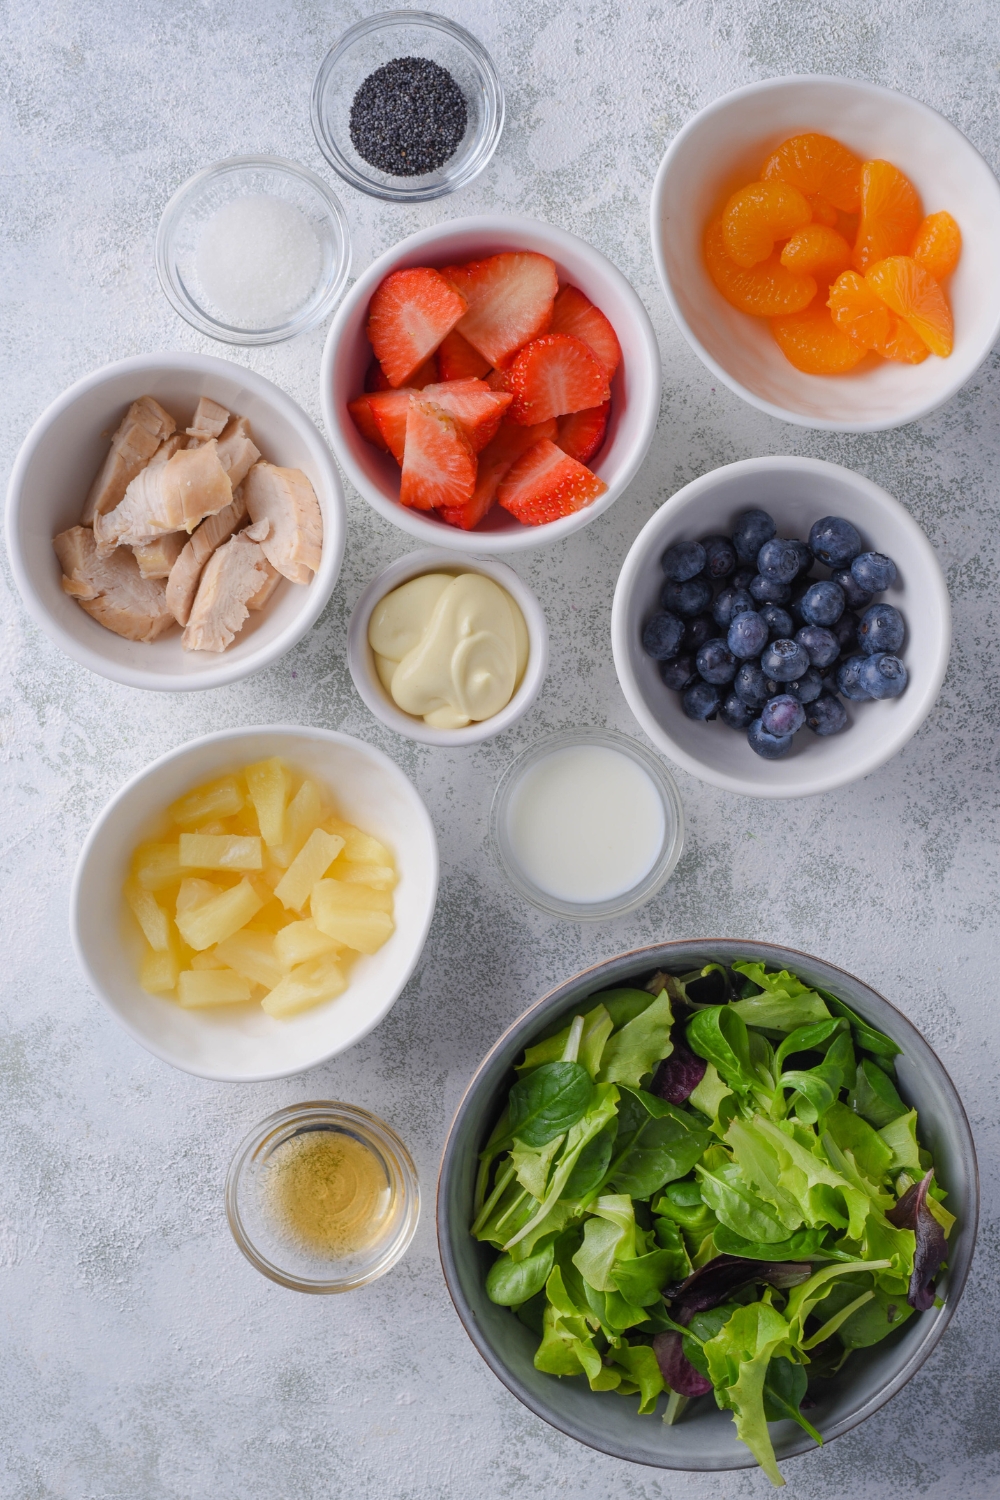 An overhead view of multipole bowls each containing a different ingredient. Pineapple chunks, mixed greens, apple cider vinegar, milk, mayo, blueberries, mandarin oranges, strawberry slices, poppyseeds, sugar, and cooked chicken are all of the ingredients shown.